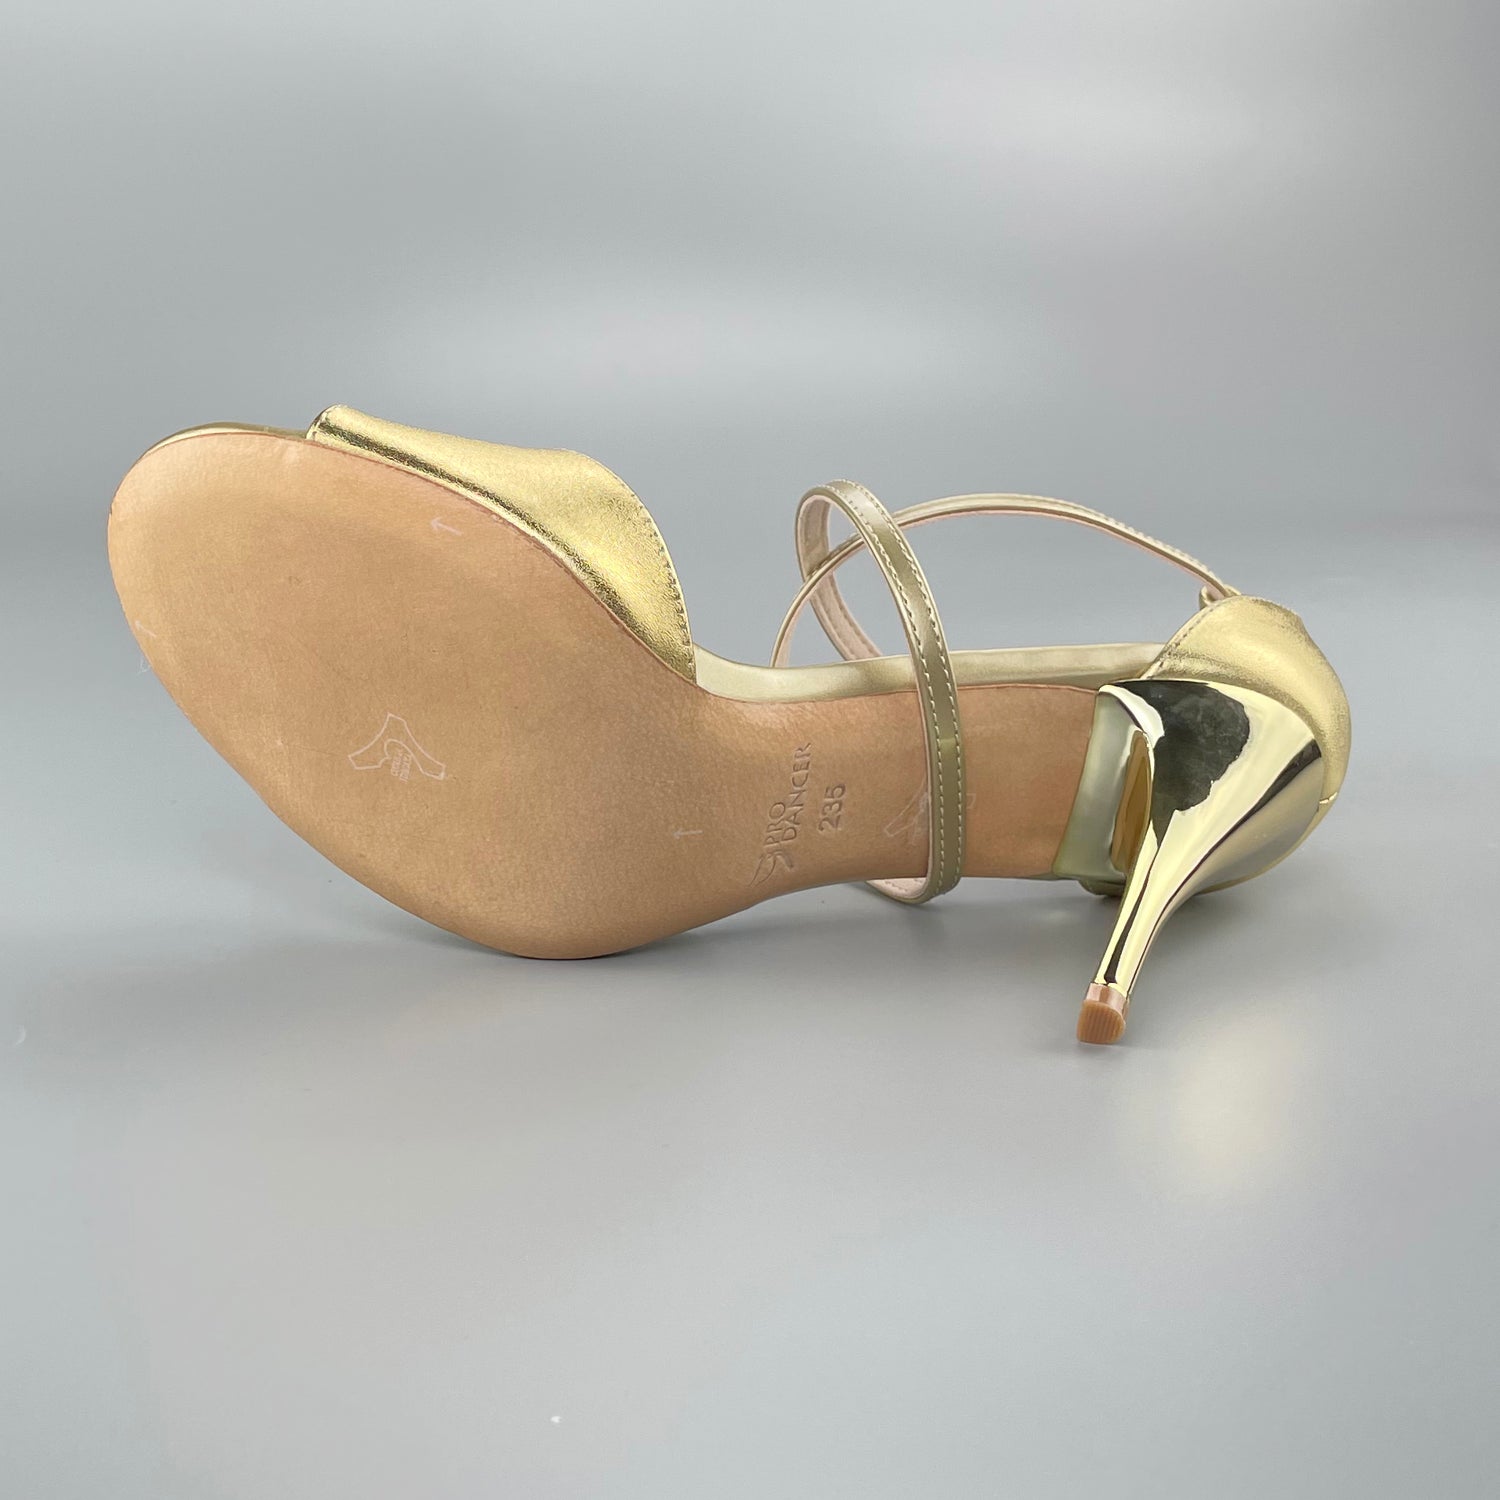 Pro Dancer Gold Tango Shoes with Leather Sole for Salsa Heels6